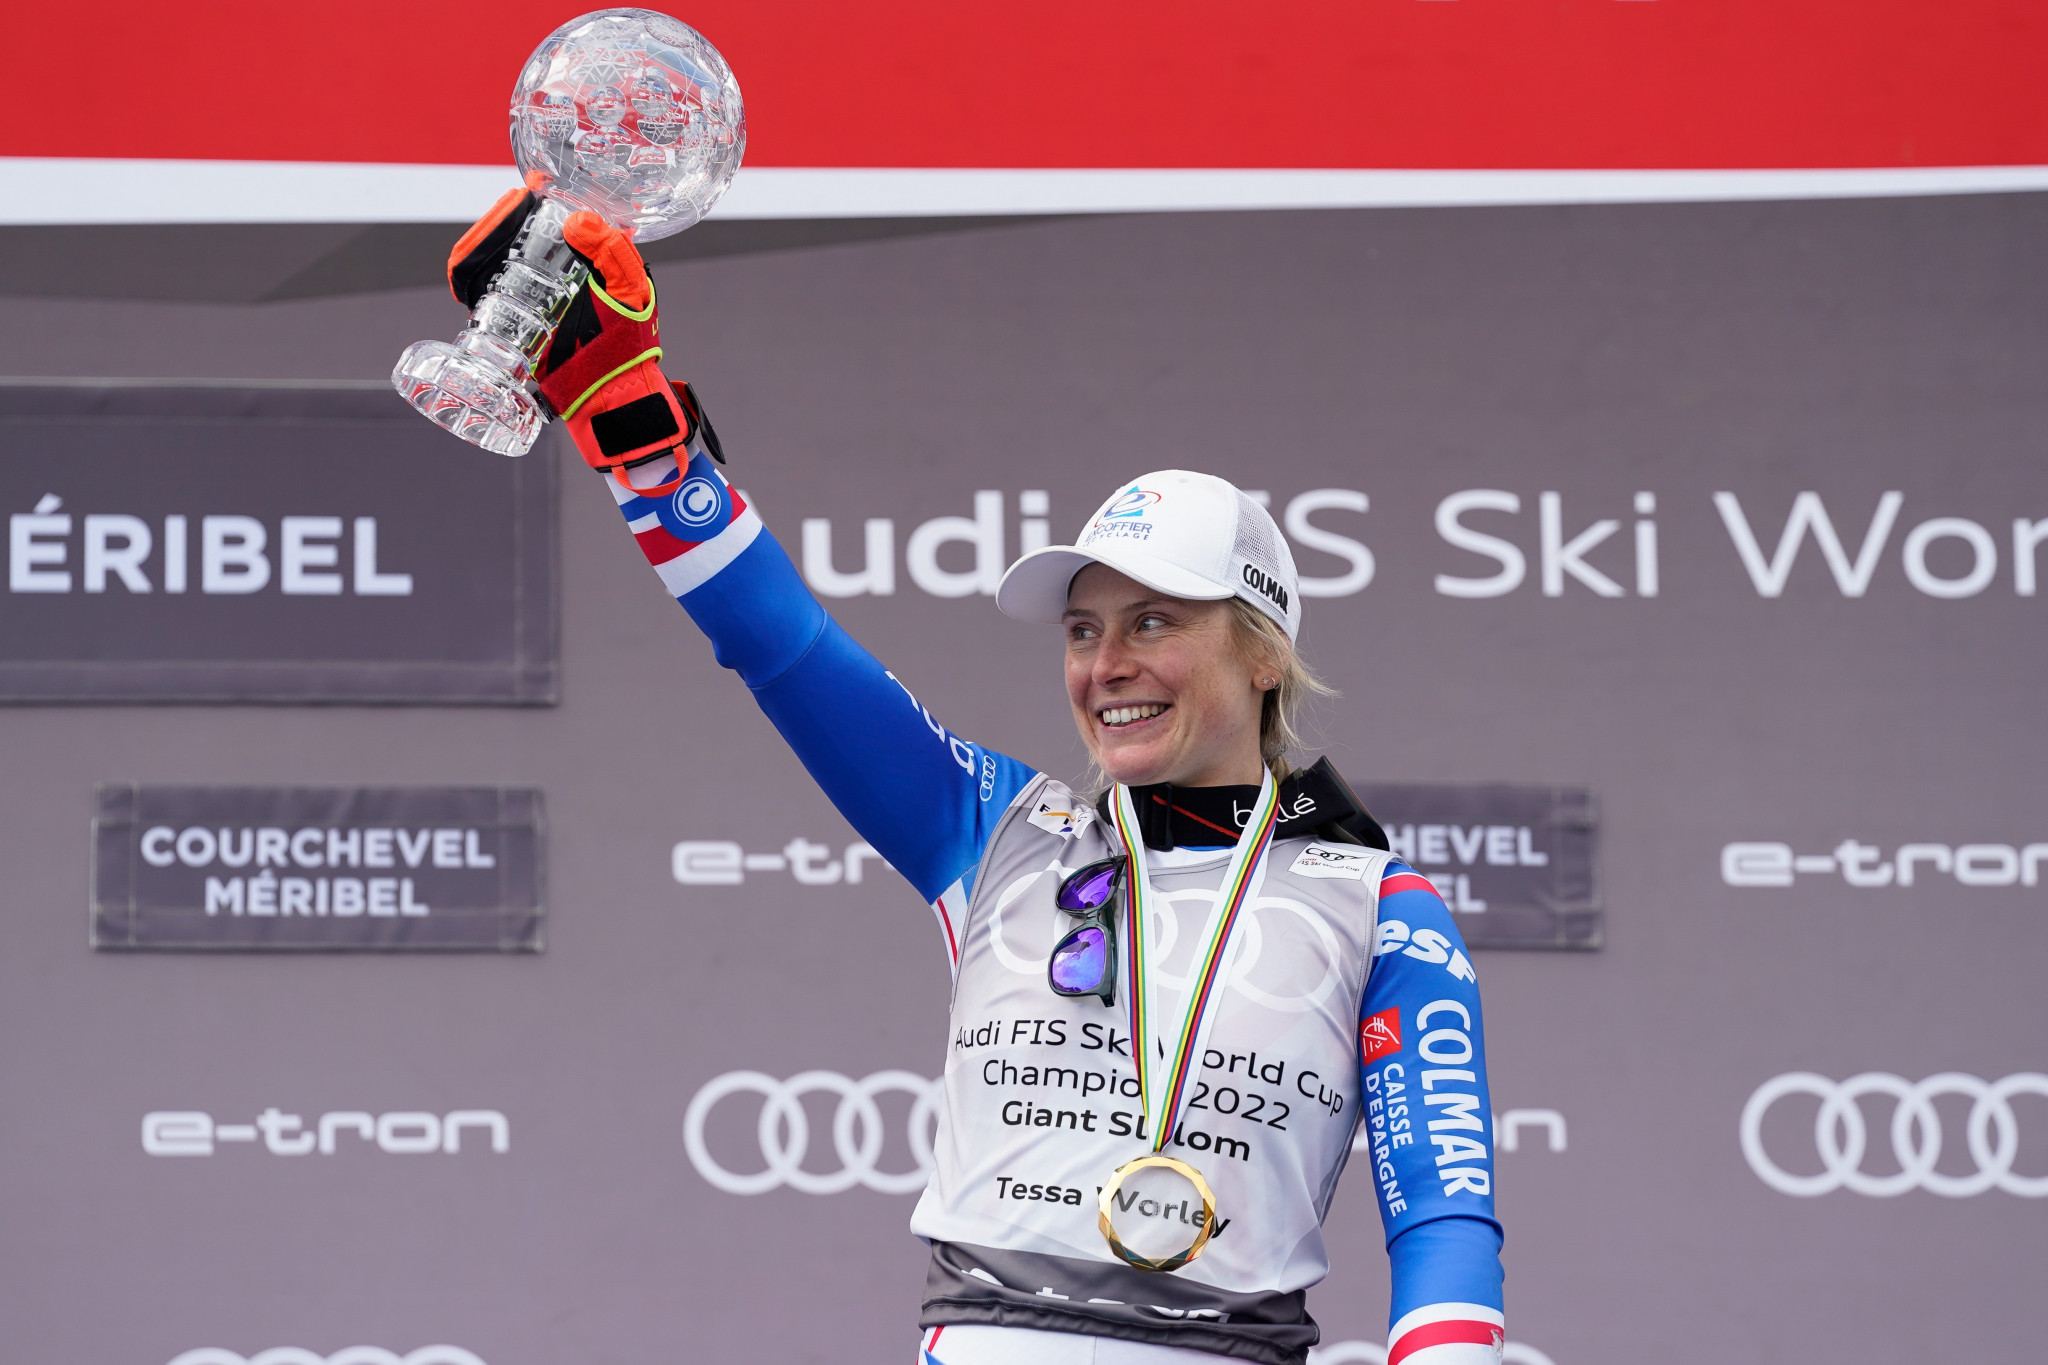 France's Tessa Worley overcame the challenge of Michaela Shiffrin and Sara Hector to win the women's giant slalom Crystal Globe ©Getty Images